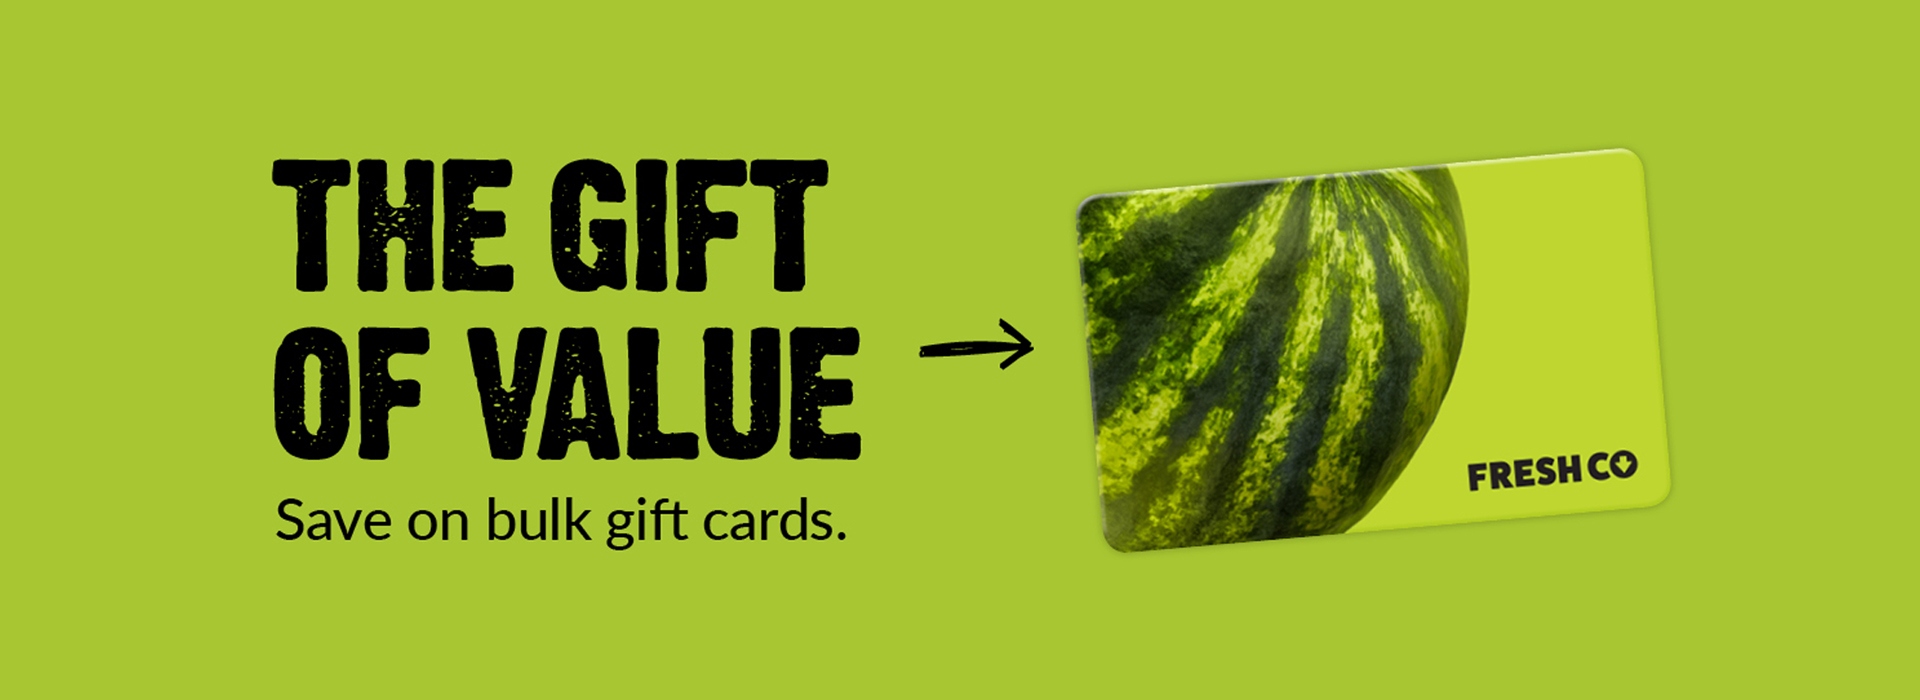 Give the gift of value with FreshCo gift cards